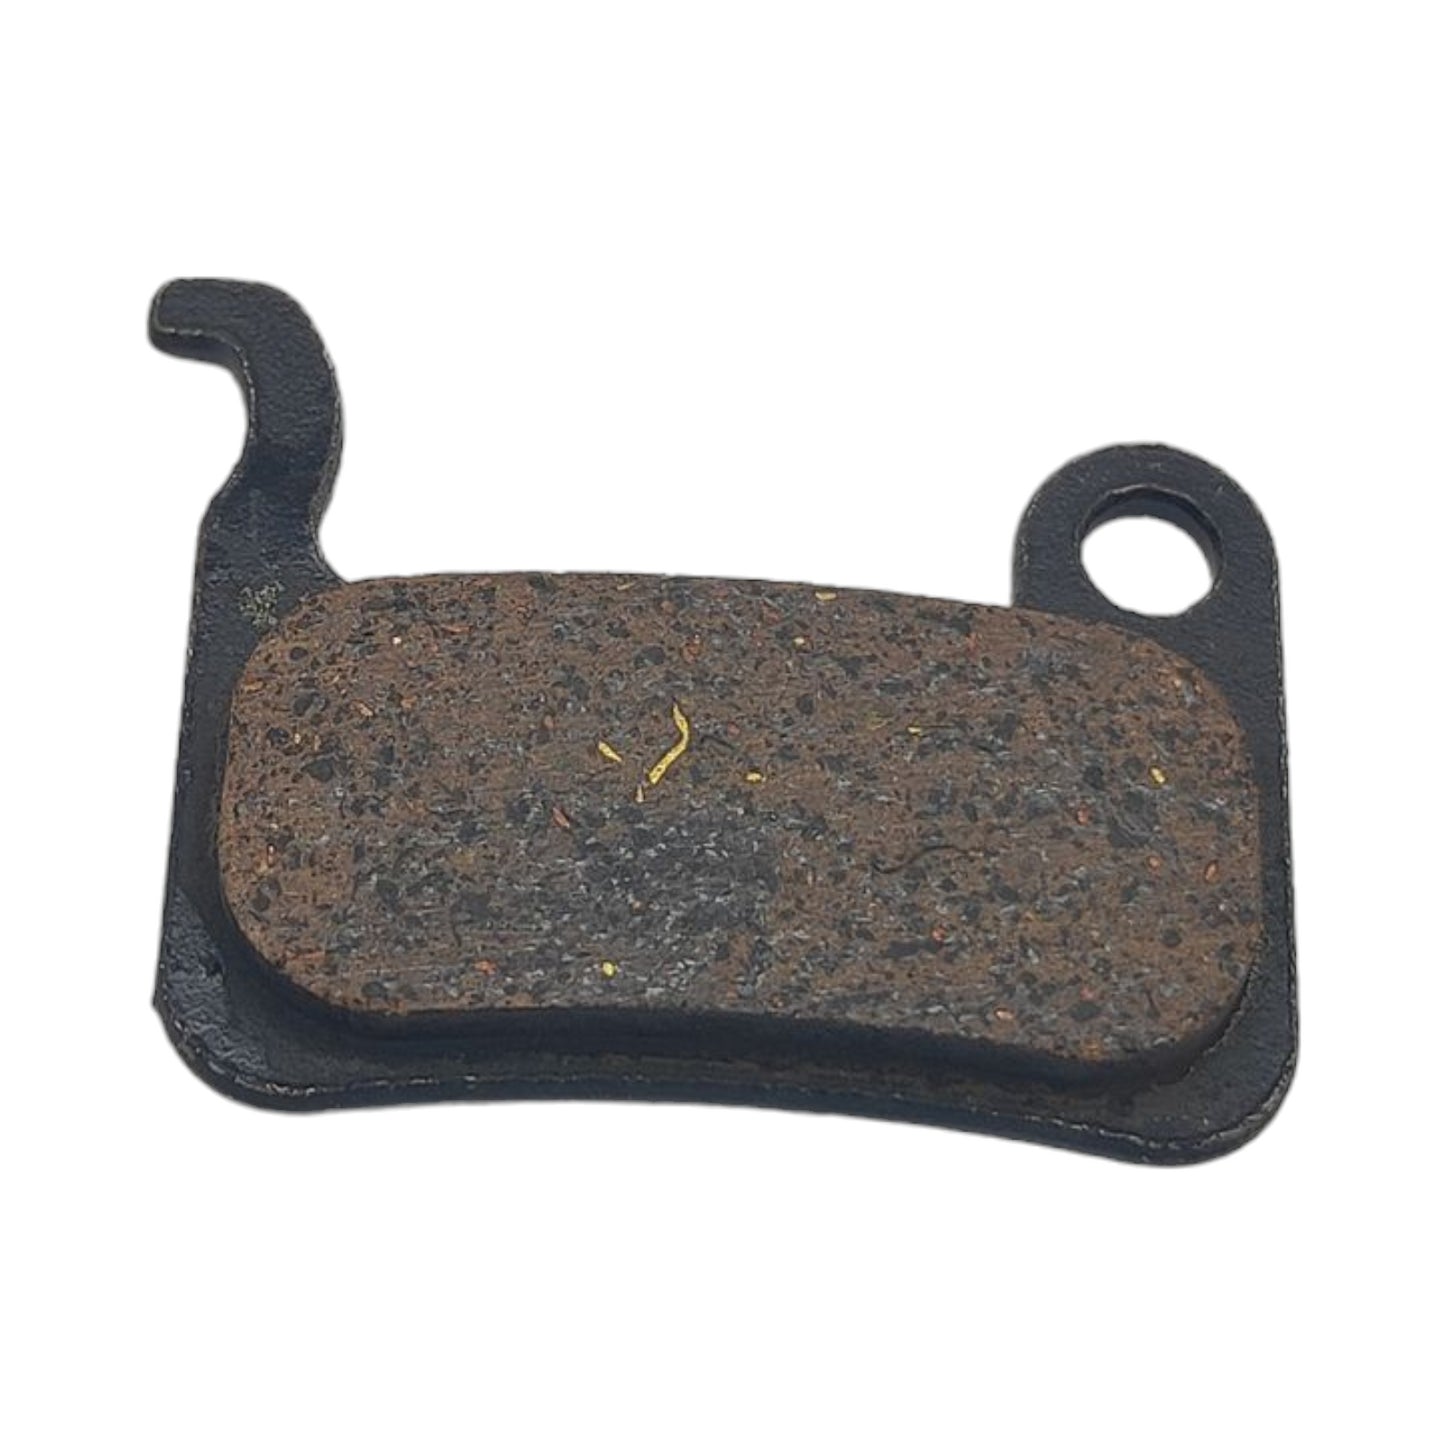 Zoom Xtech HB100 brake pad brake pads set of 2 High-quality branded product